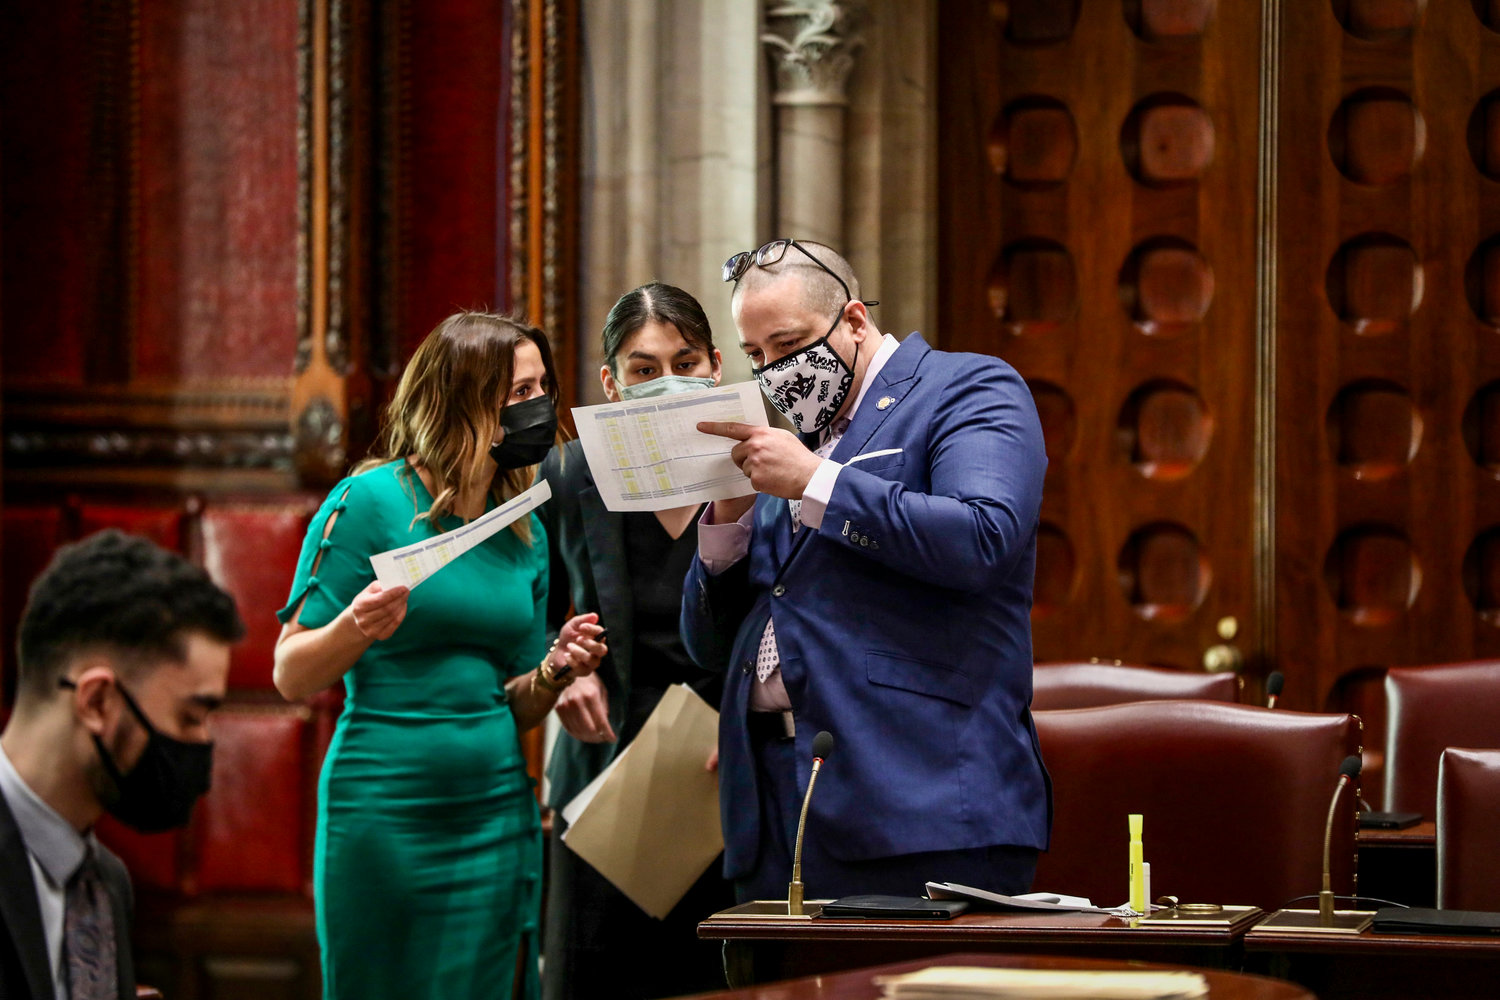 State Sen. Gustavo Rivera was one of the state lawmakers pushing to raise taxes on wealthy individuals, which were included in this year’s state budget. Lawmakers say these taxes will generate a projected $4 billion a year to fund some of the spending in the $212 billion budget.